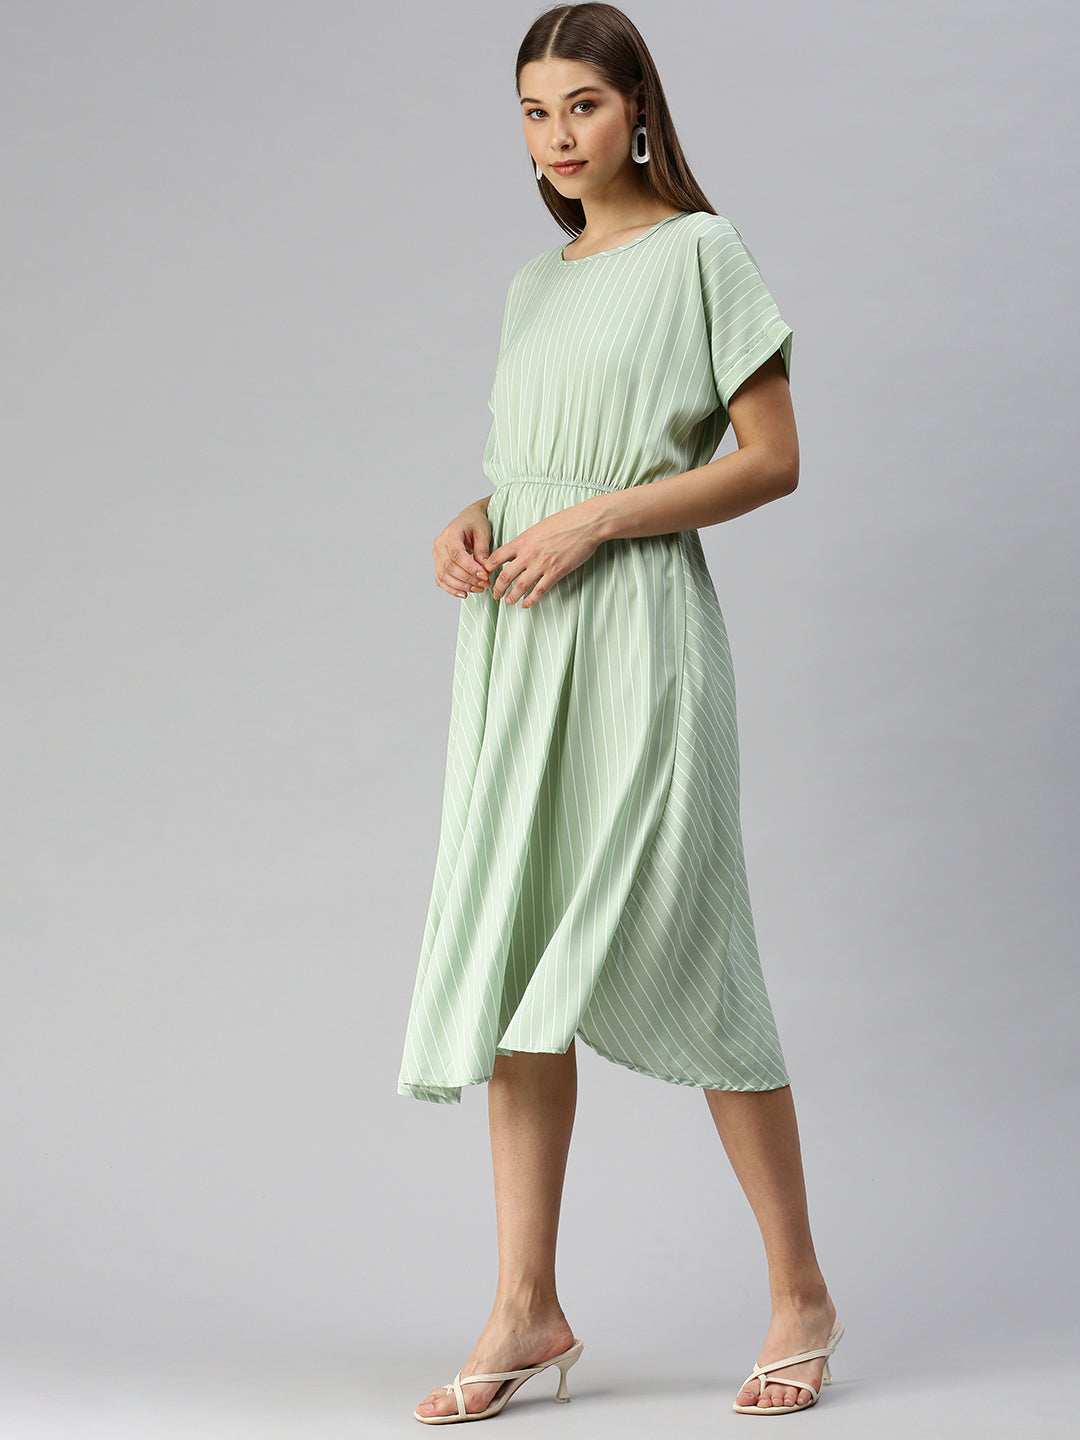 Women's Green Striped Fit and Flare Dress